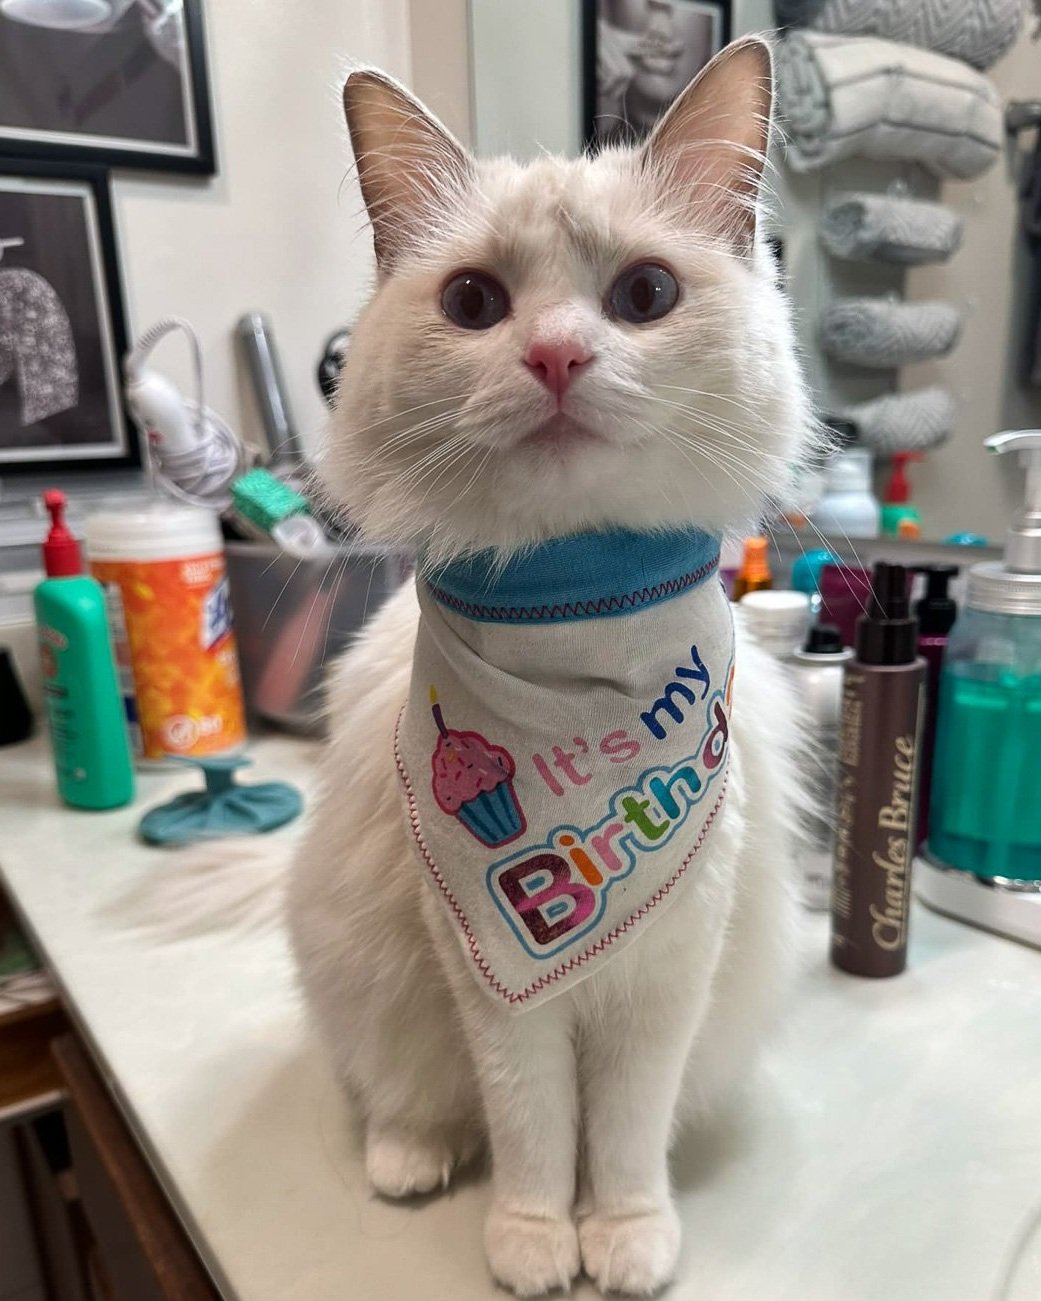 A white cat sitting on a bathroom bench top wearing a bib with the words It's my birthday written on it